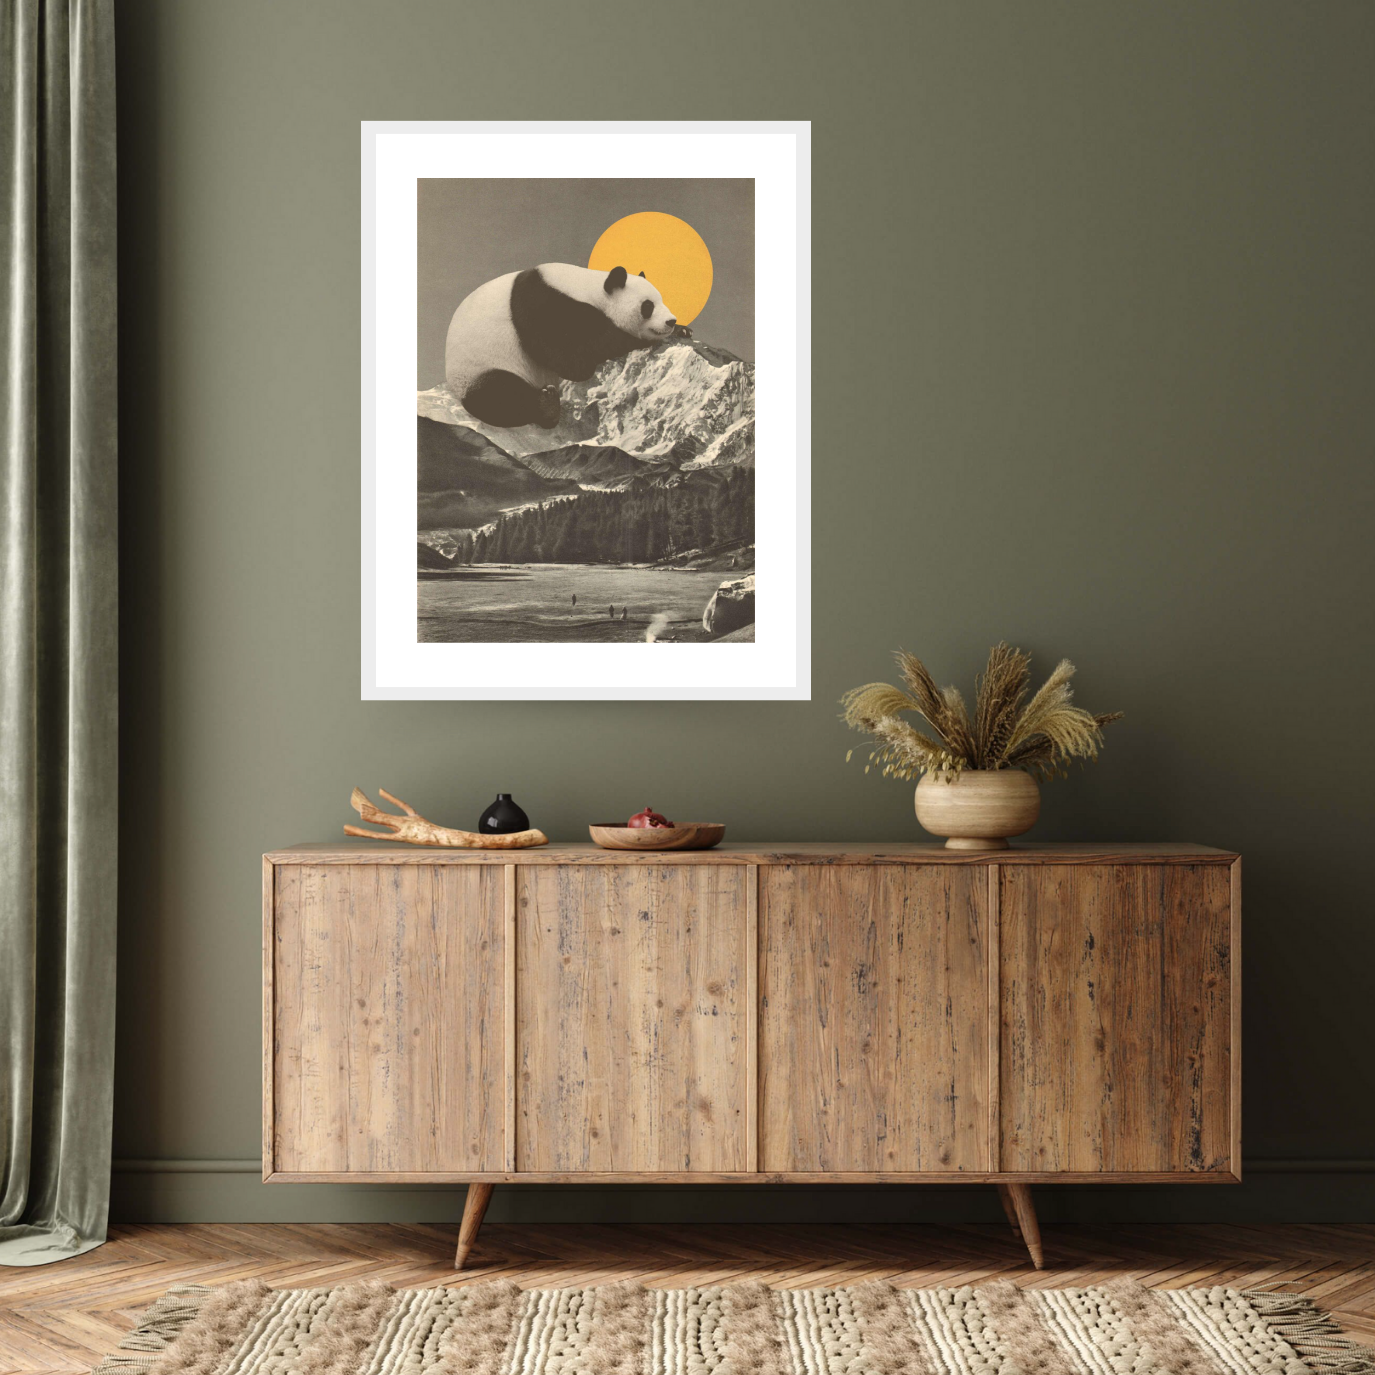 White framed archival print: 'Pandas Nap into Mountains, 2020' by Florent Bodart. A panda rests atop snowy peaks under a golden sun. Printed on Hahnemühle German etching paper.